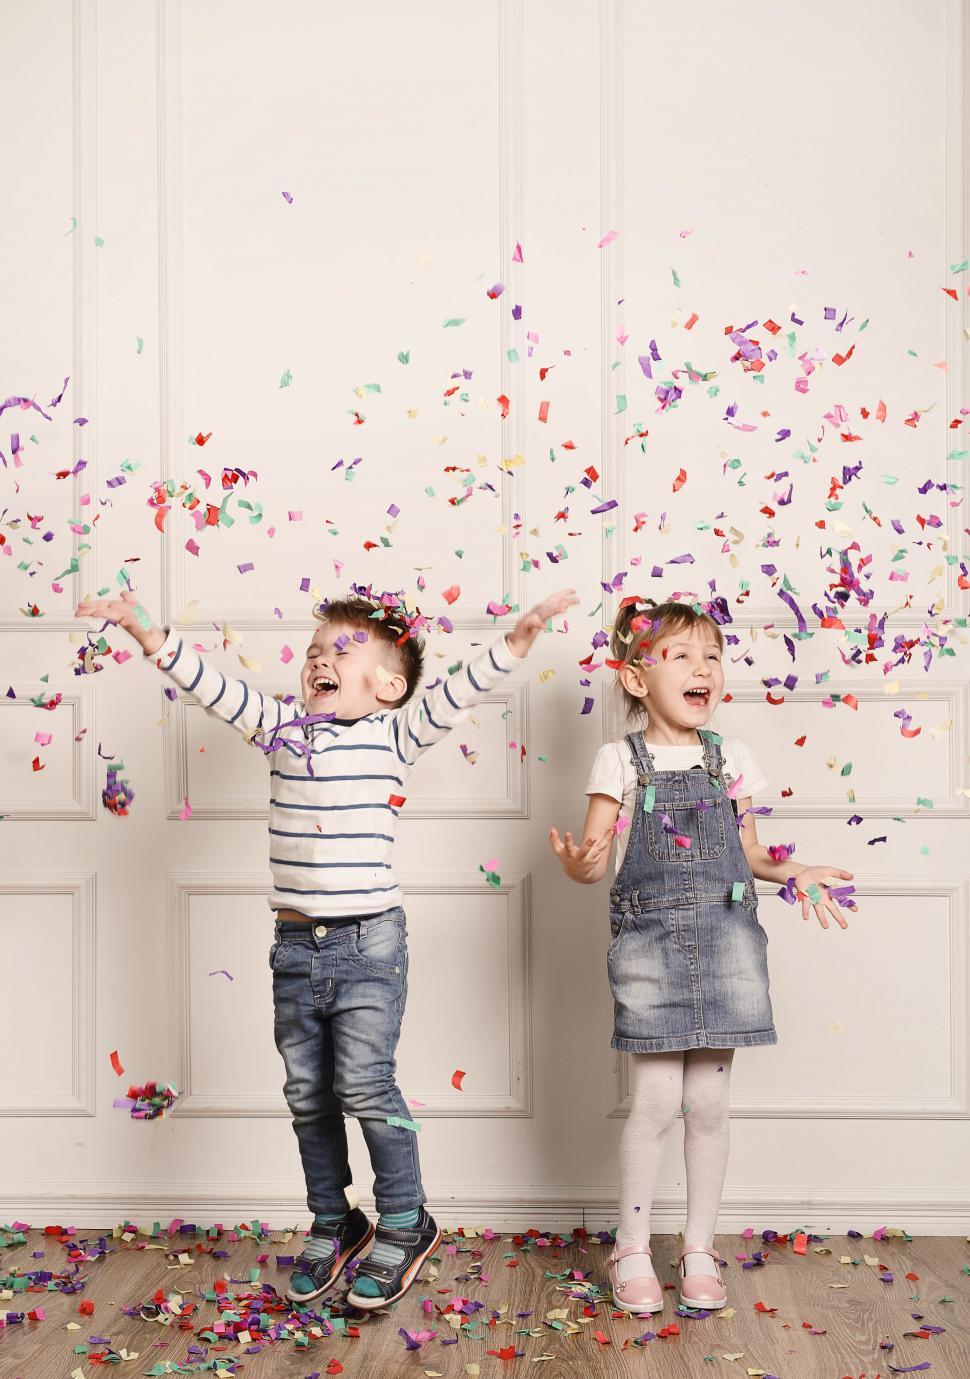 Free Image of Kids and confetti  